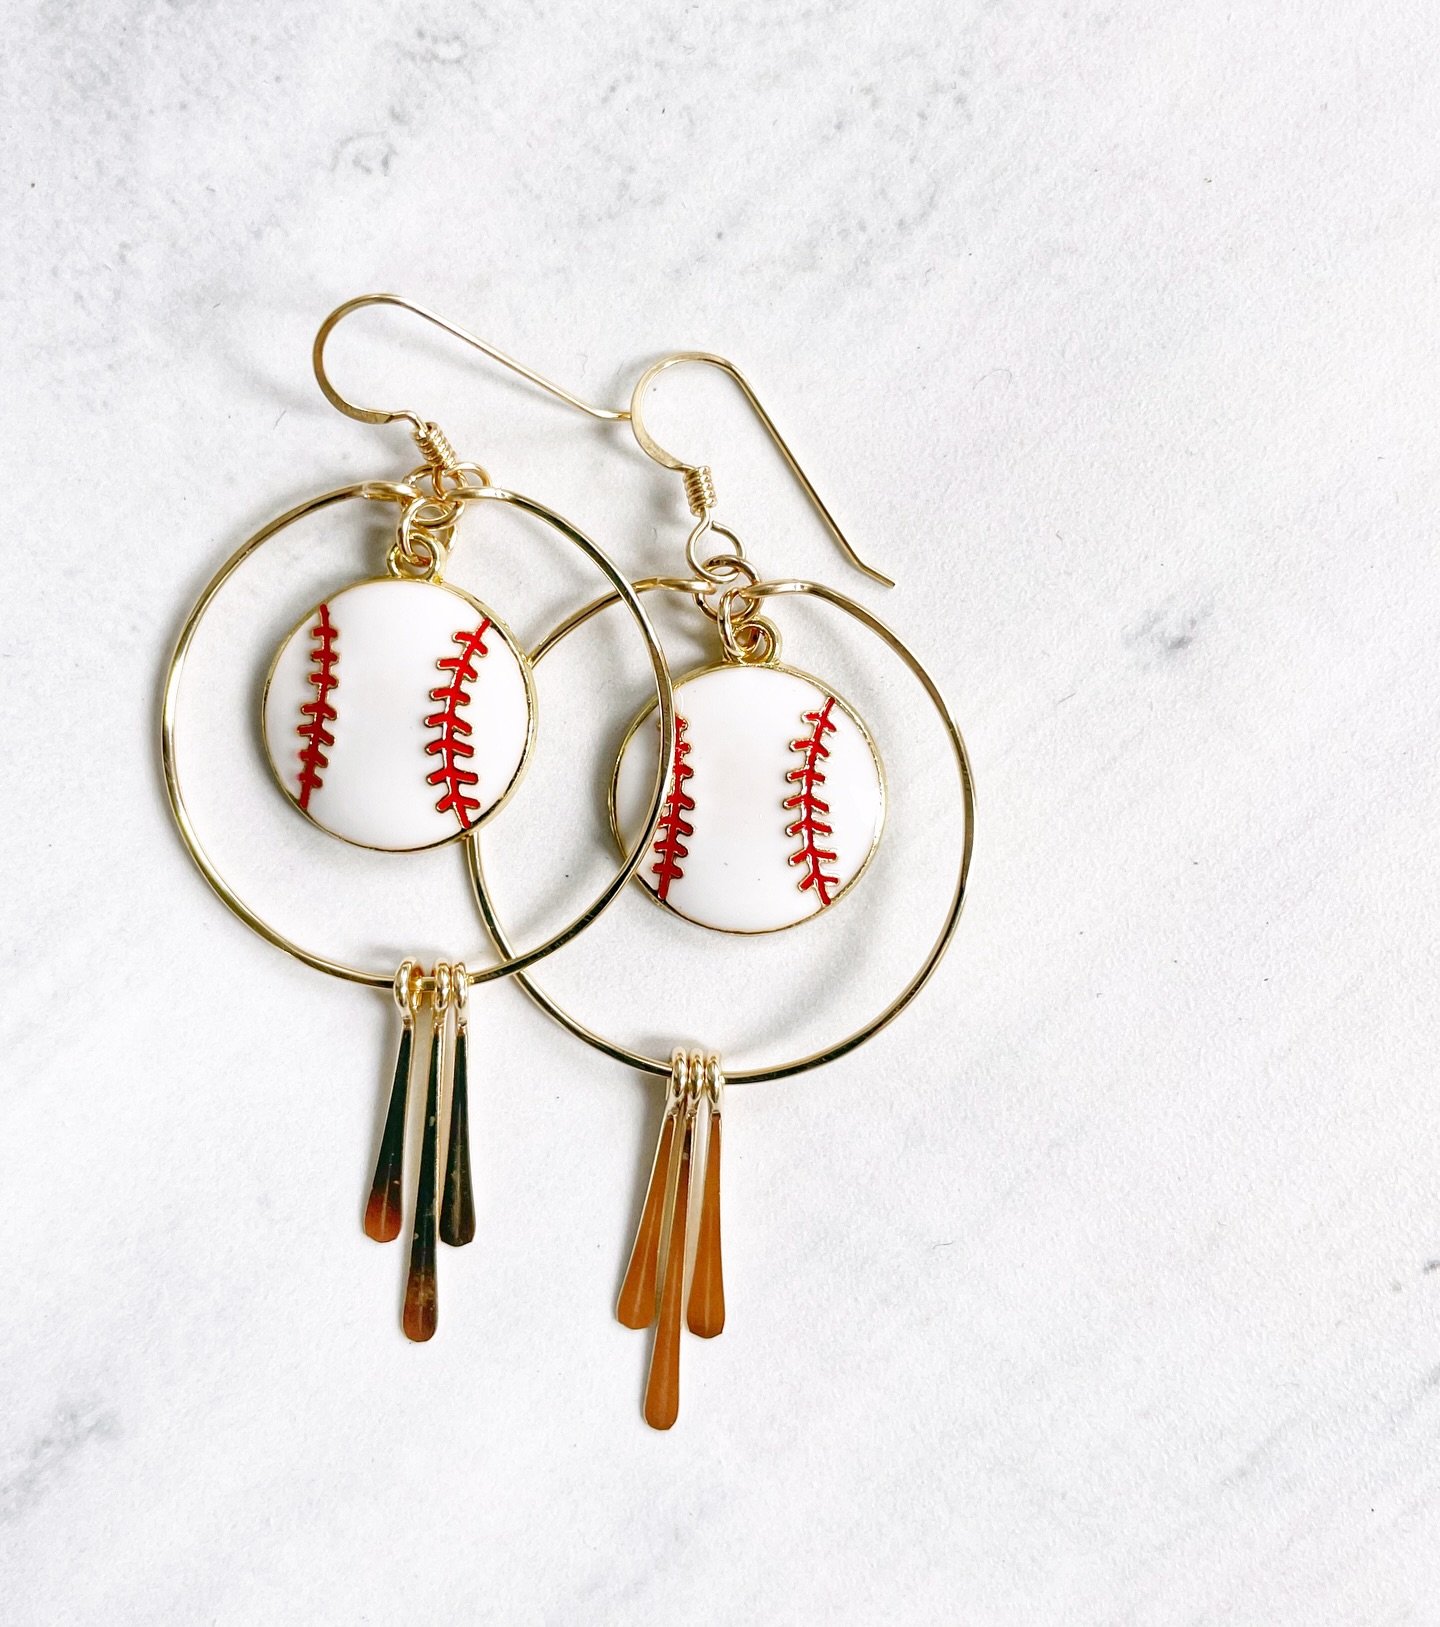 The best season is baseball season! Get your accessories and show your love for the game!